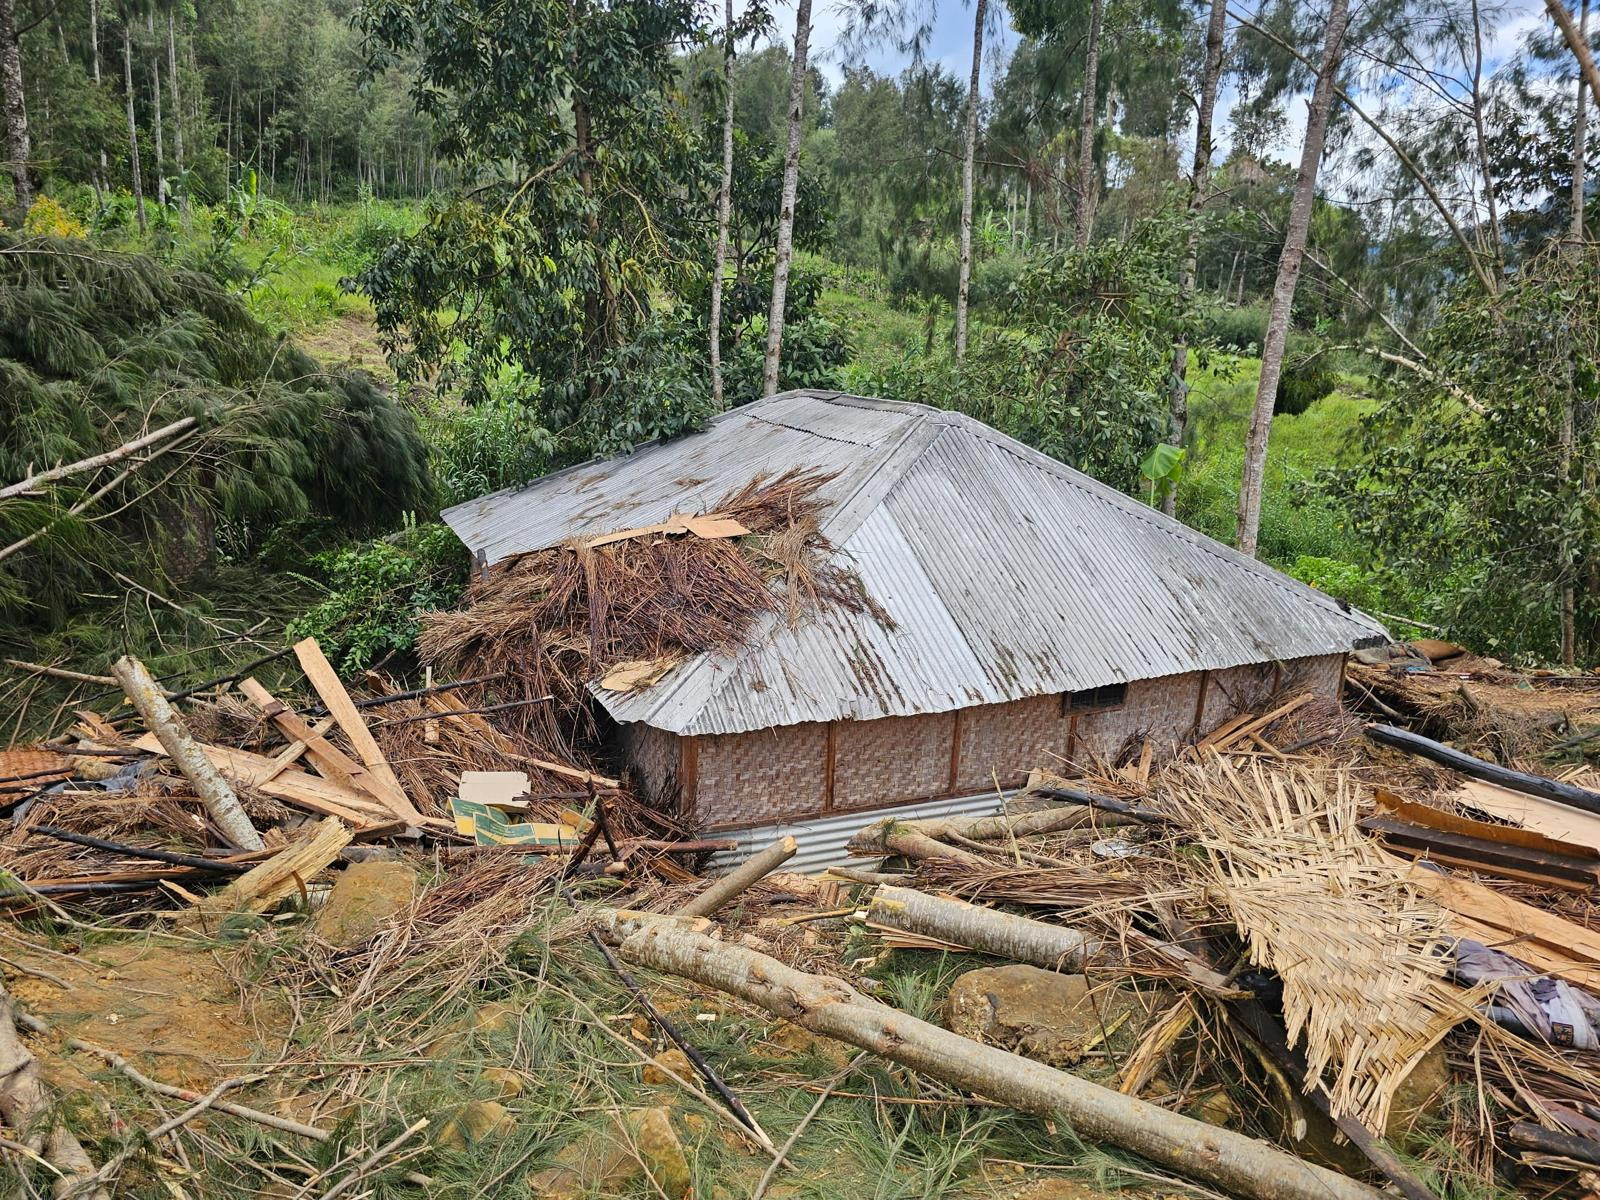 View of the damage after a landslide in Maip Mulitaka